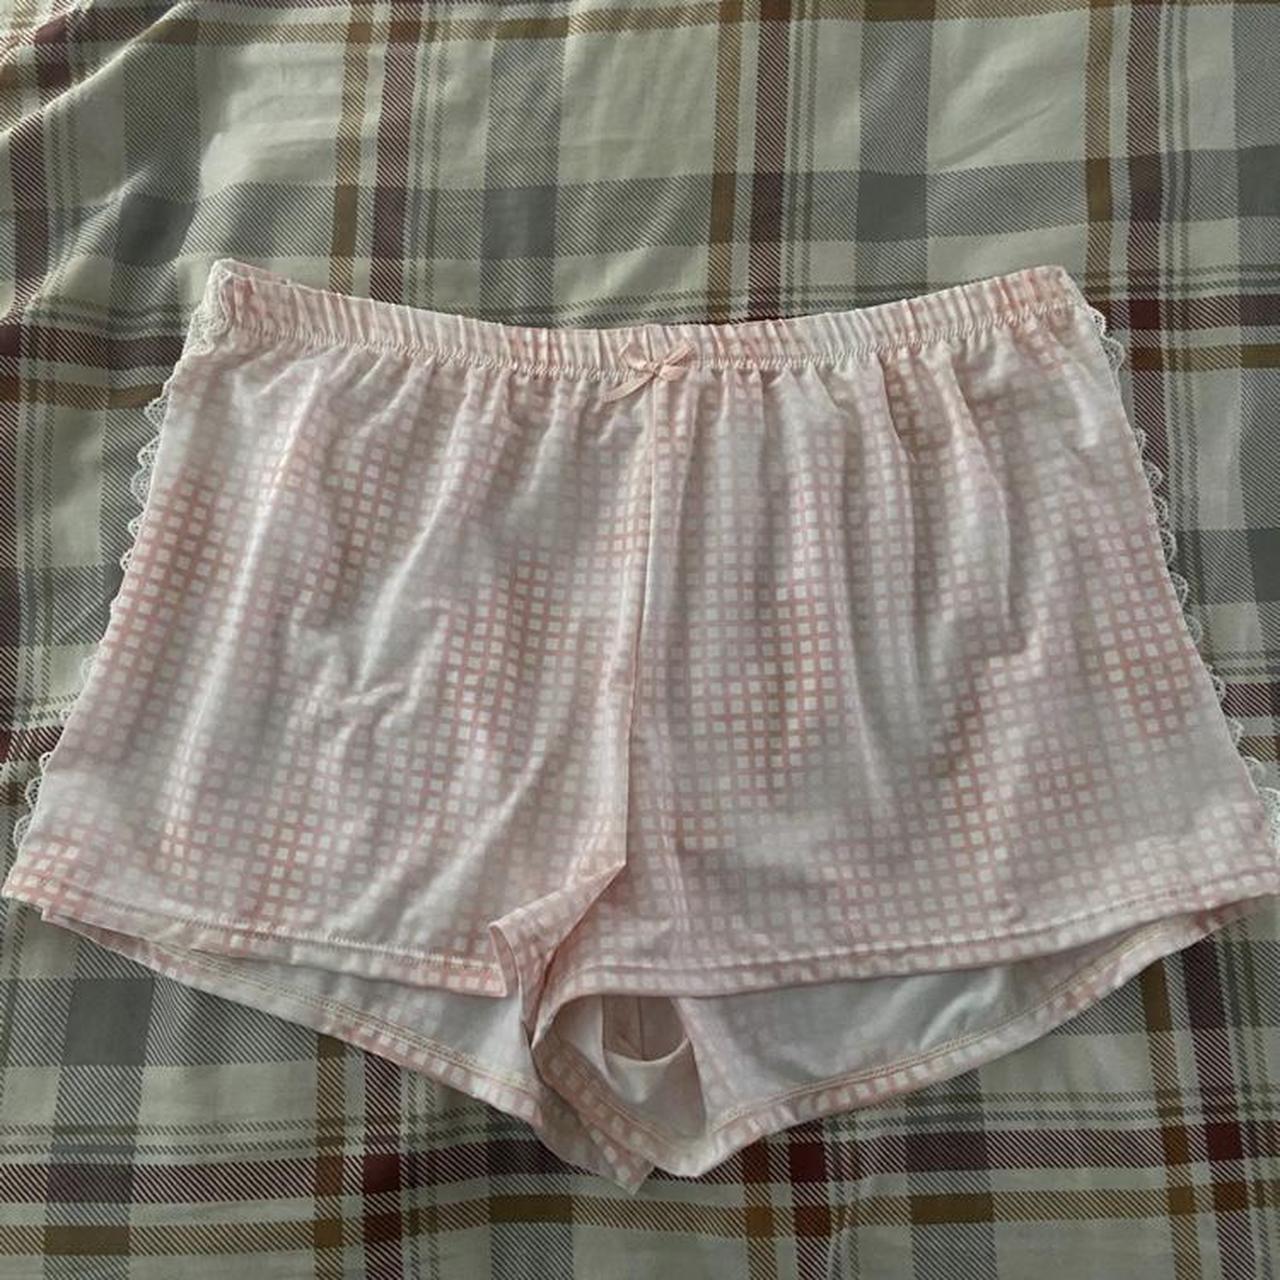 Abercrombie & Fitch Women's Pink and White Pajamas | Depop